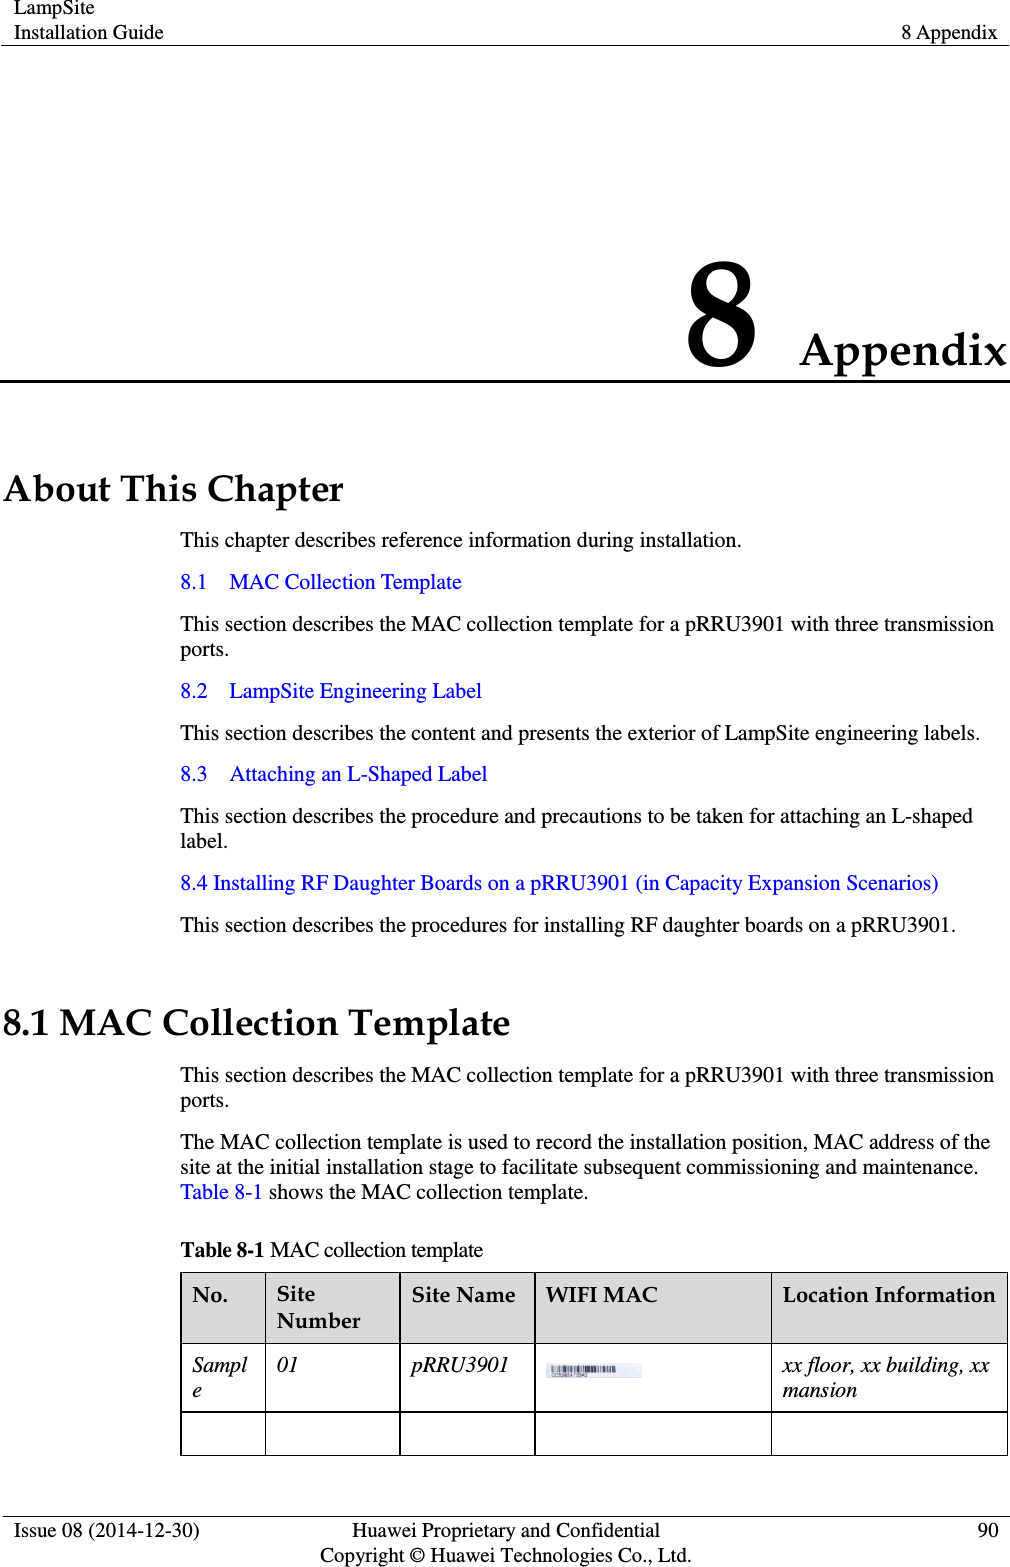 LampSite Installation Guide 8 Appendix  Issue 08 (2014-12-30) Huawei Proprietary and Confidential                                     Copyright © Huawei Technologies Co., Ltd. 90  8 Appendix About This Chapter This chapter describes reference information during installation. 8.1    MAC Collection Template This section describes the MAC collection template for a pRRU3901 with three transmission ports. 8.2    LampSite Engineering Label This section describes the content and presents the exterior of LampSite engineering labels. 8.3    Attaching an L-Shaped Label This section describes the procedure and precautions to be taken for attaching an L-shaped label. 8.4 Installing RF Daughter Boards on a pRRU3901 (in Capacity Expansion Scenarios) This section describes the procedures for installing RF daughter boards on a pRRU3901. 8.1 MAC Collection Template This section describes the MAC collection template for a pRRU3901 with three transmission ports. The MAC collection template is used to record the installation position, MAC address of the site at the initial installation stage to facilitate subsequent commissioning and maintenance. Table 8-1 shows the MAC collection template. Table 8-1 MAC collection template No. Site Number Site Name WIFI MAC Location Information Sample 01 pRRU3901  xx floor, xx building, xx mansion      